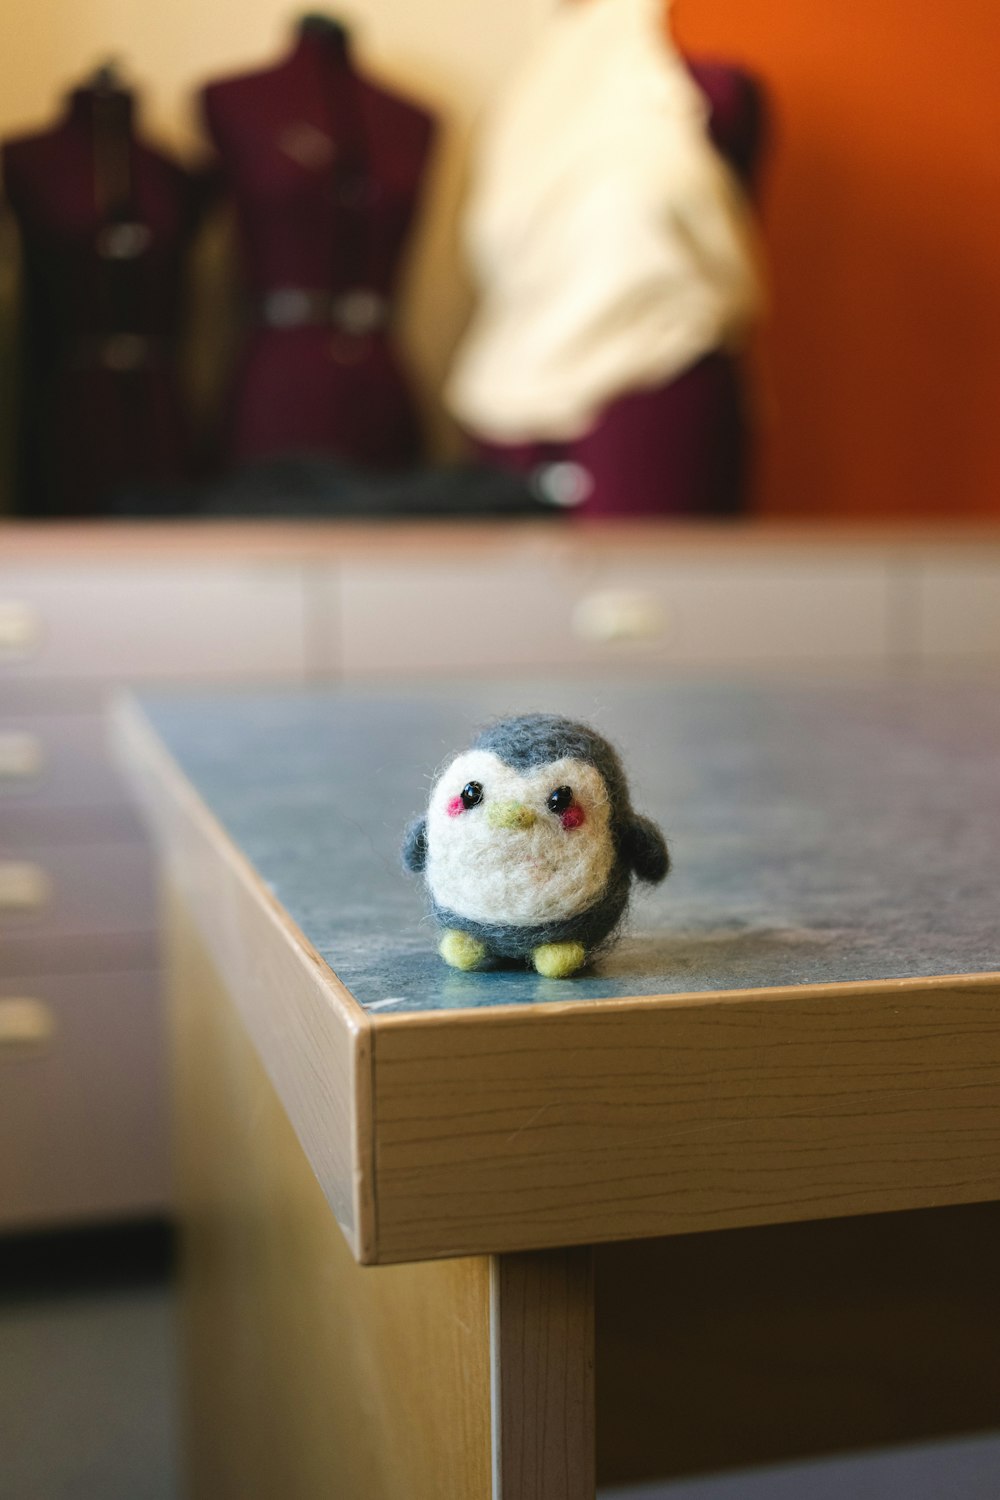 a small bird sitting on top of a wooden table